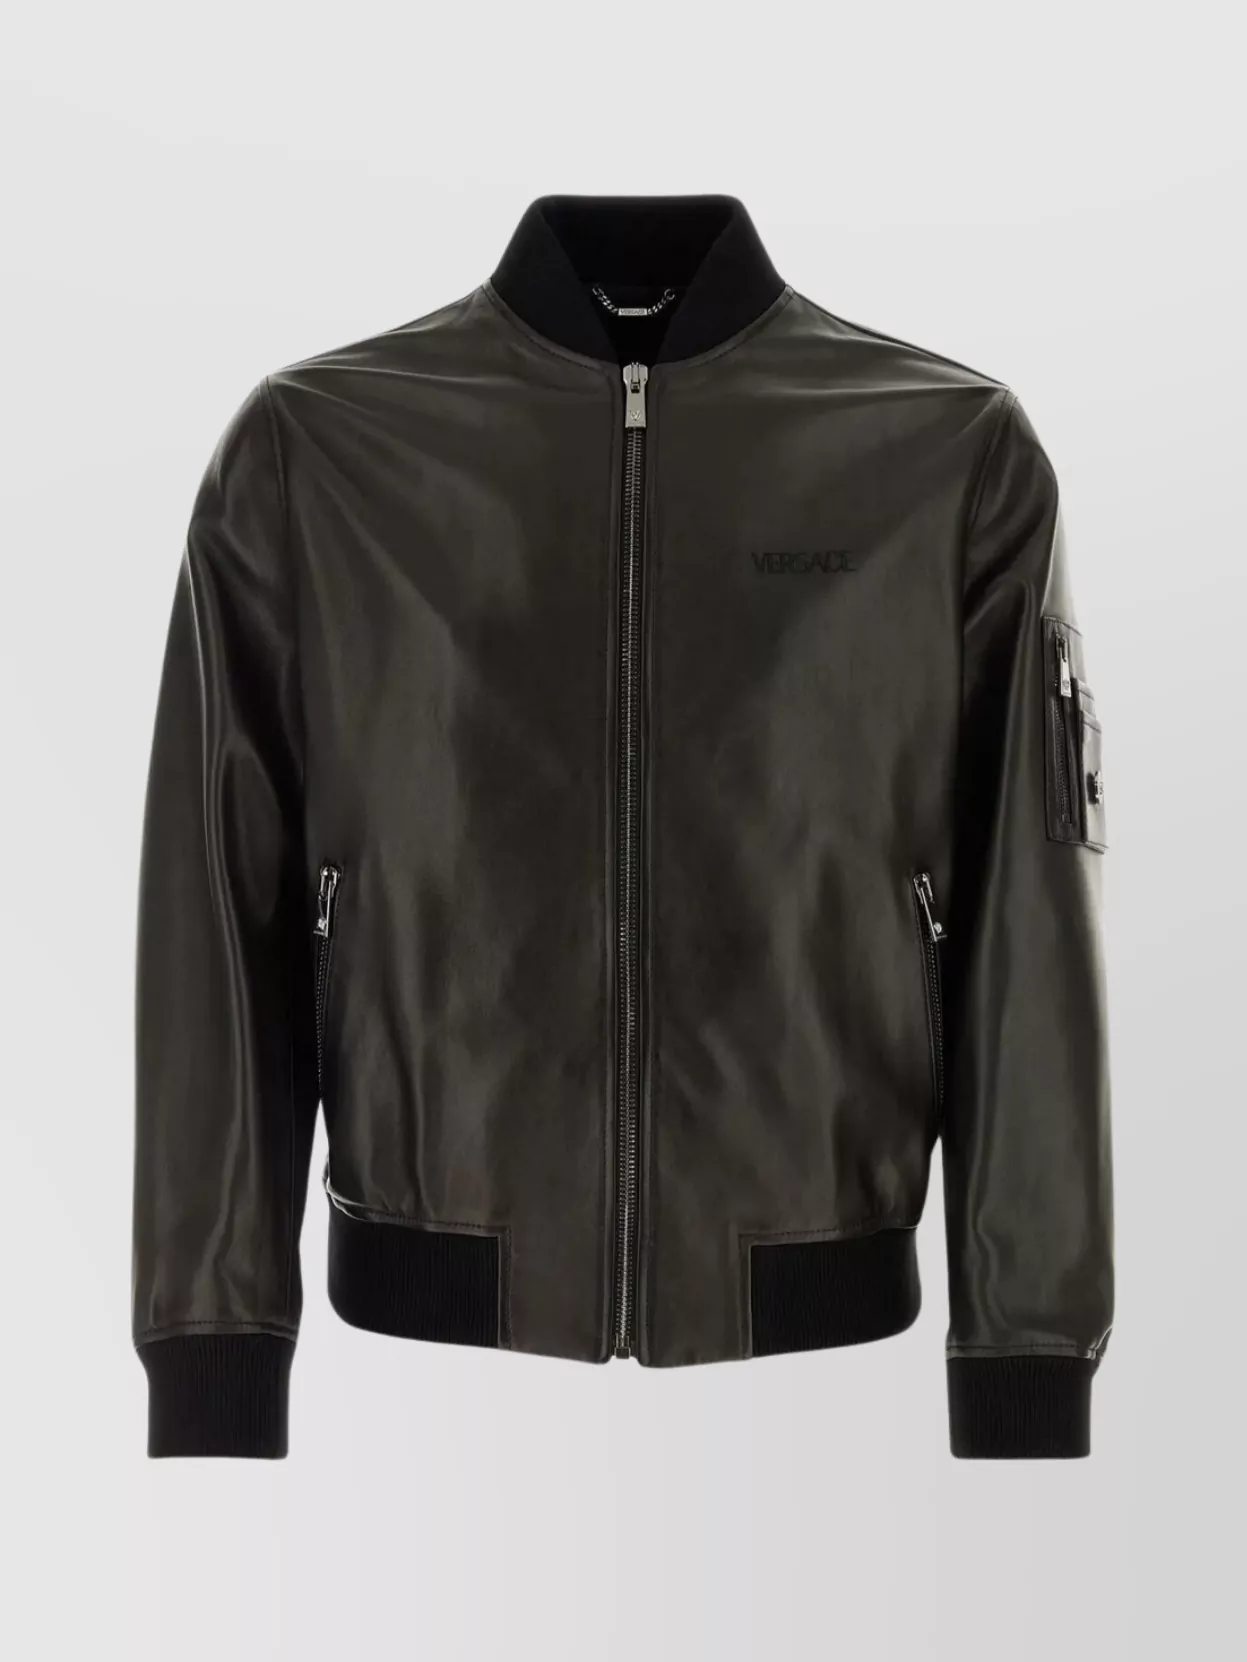 Versace Lamb Leather Bomber With Multiple Pockets In Brown